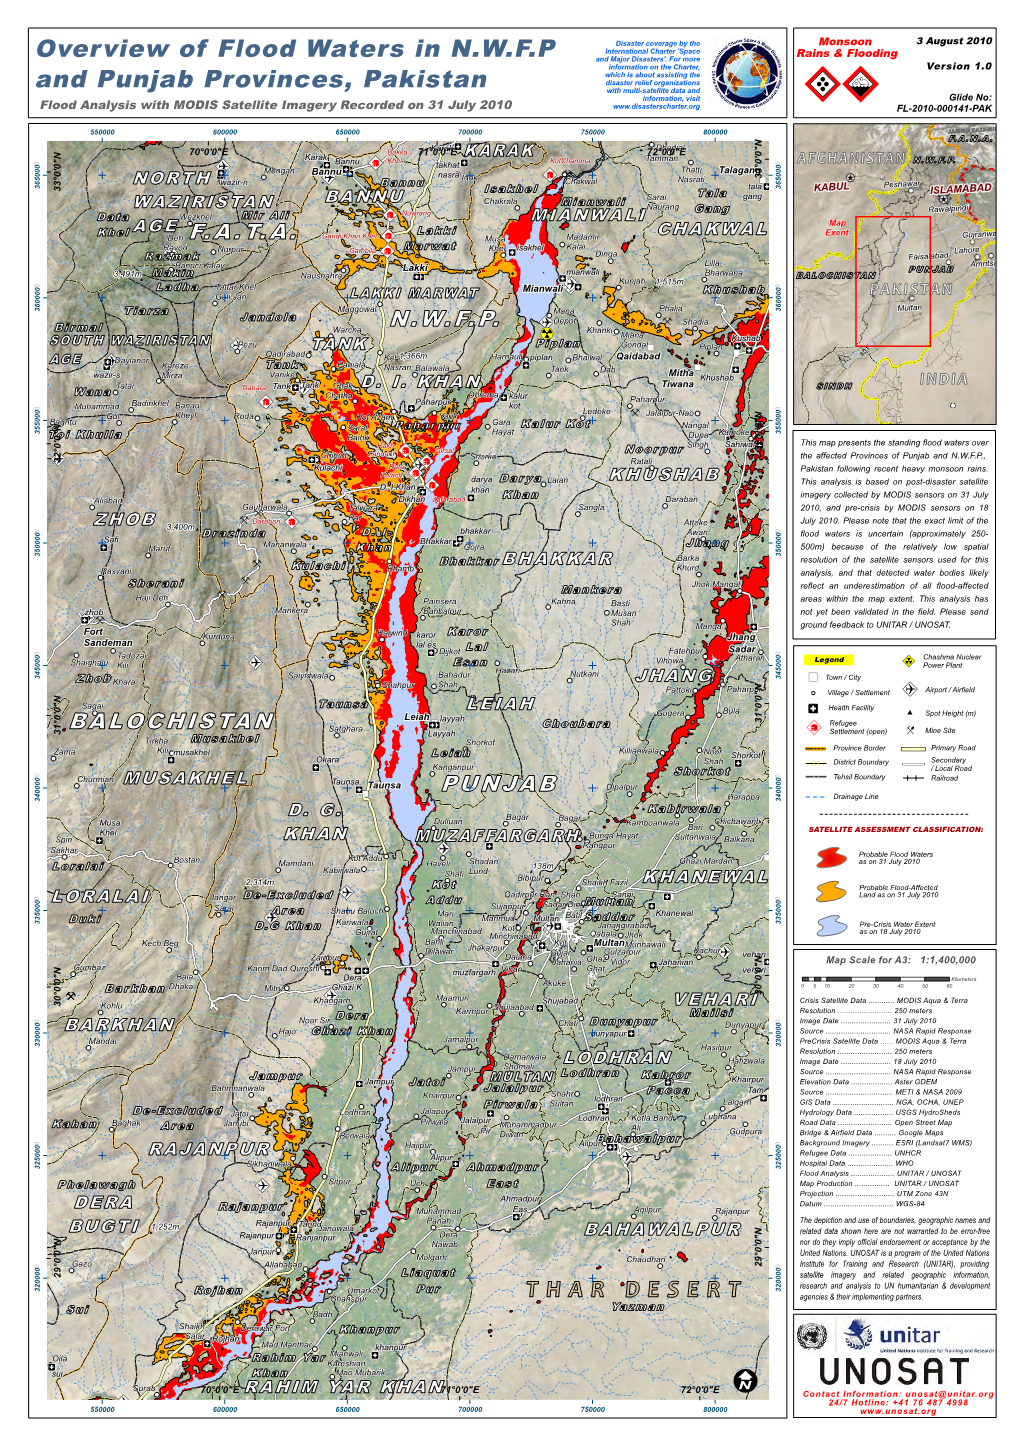 Overview of Flood Waters in N.W.F.P. and Punjab Provinces, Pakistan